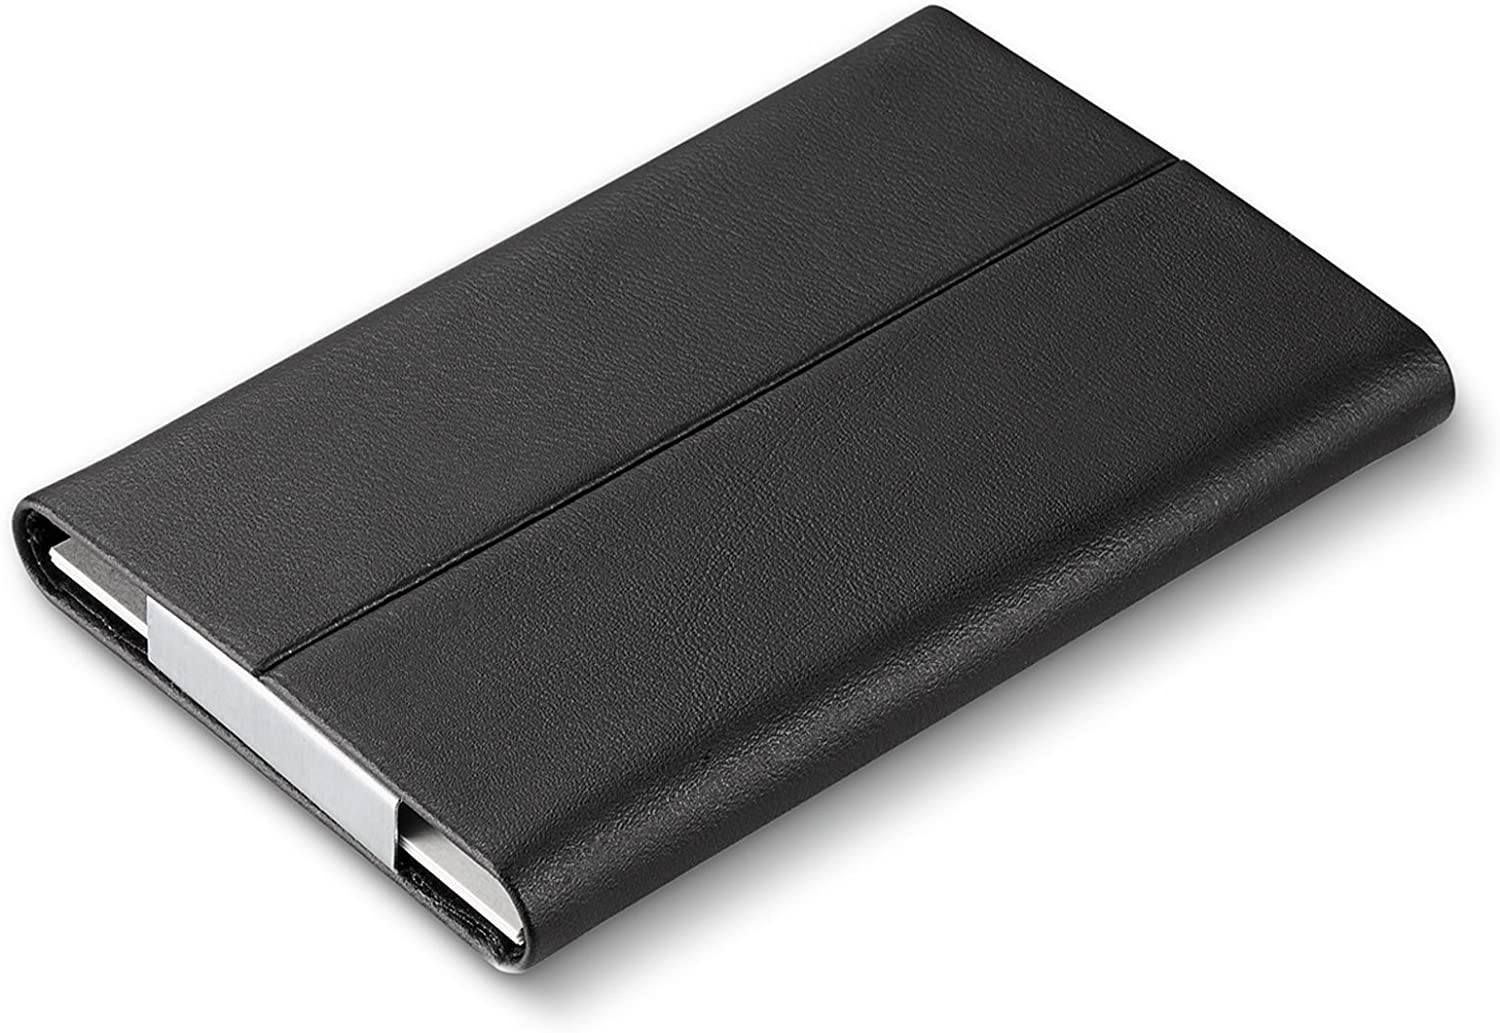 Philippi 'DUE' Business card holder leather stainless steel magnetic closur